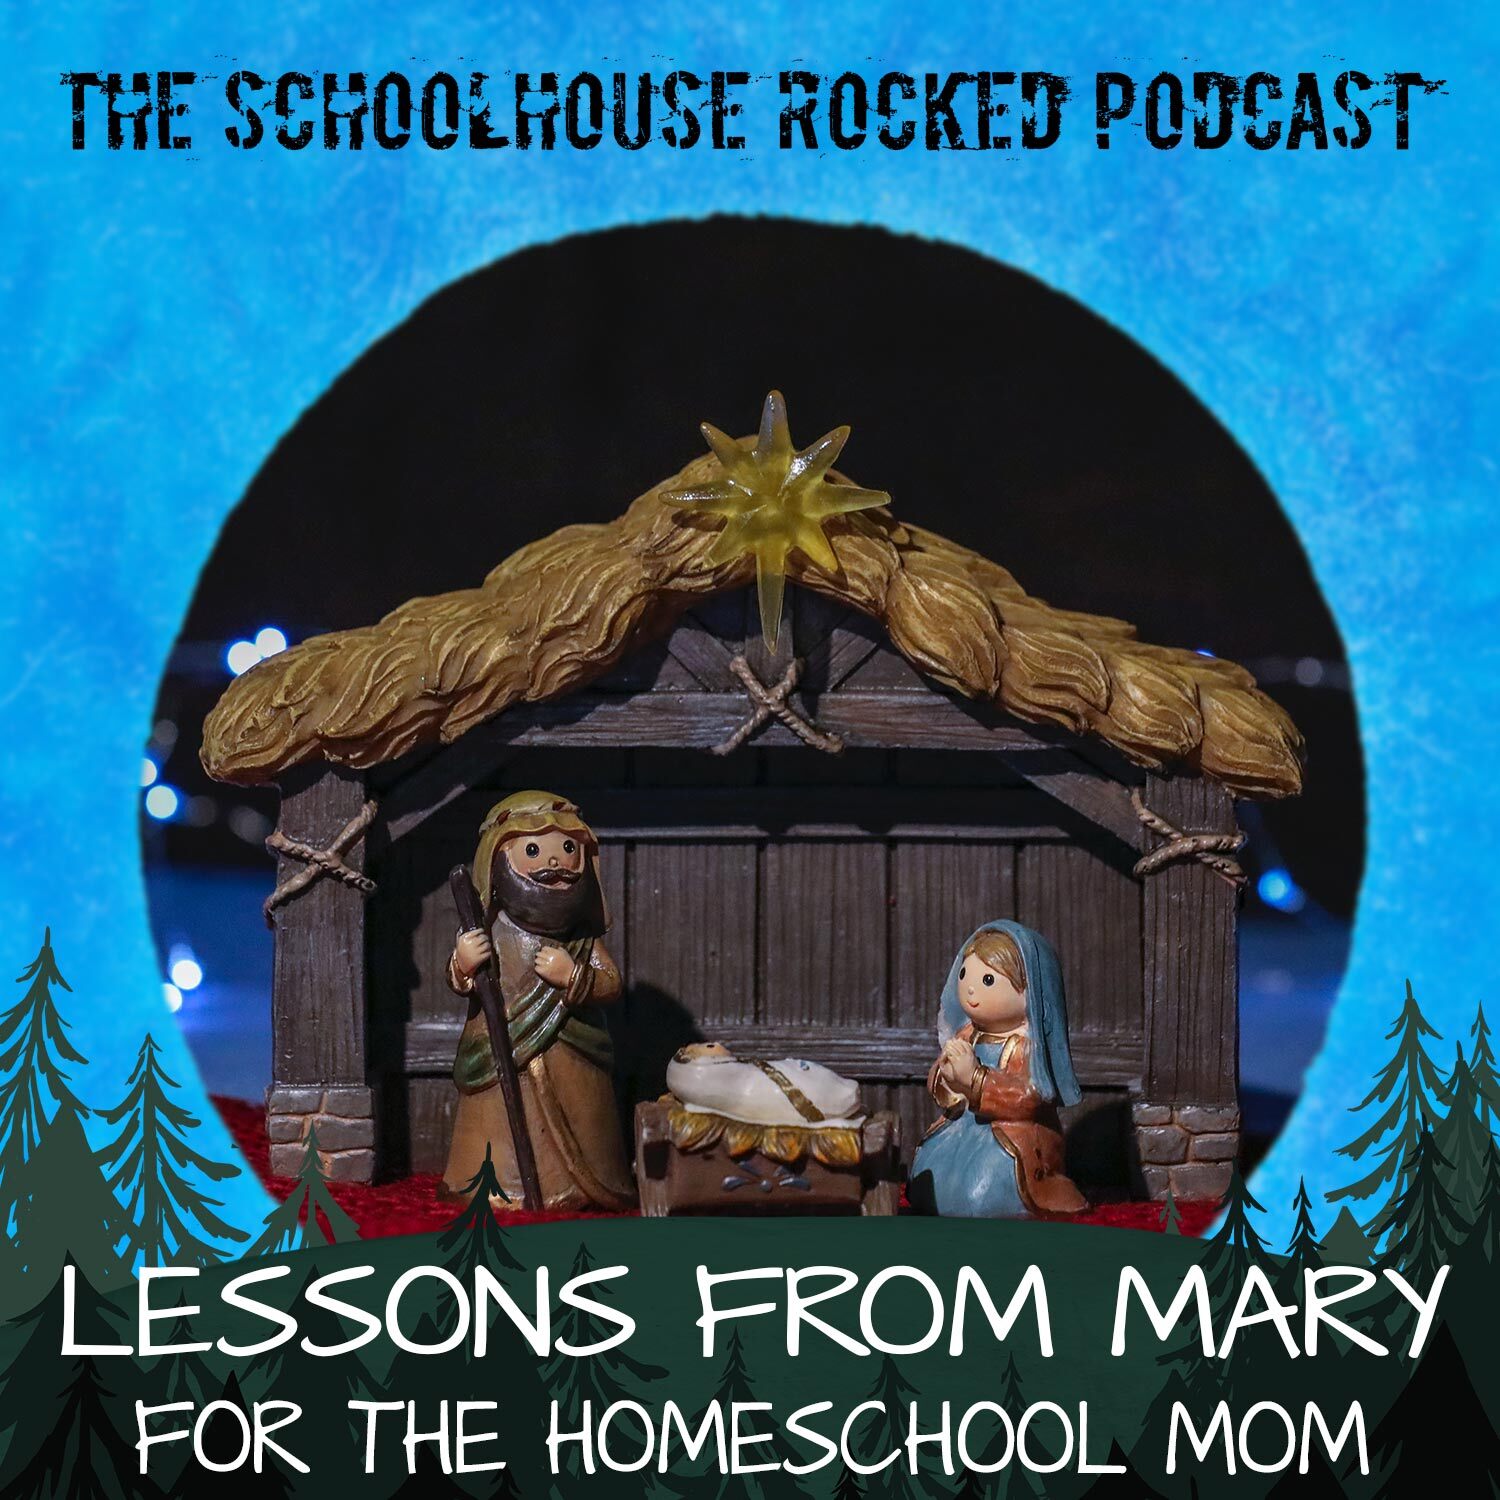 Lessons from Mary for Homeschool Moms